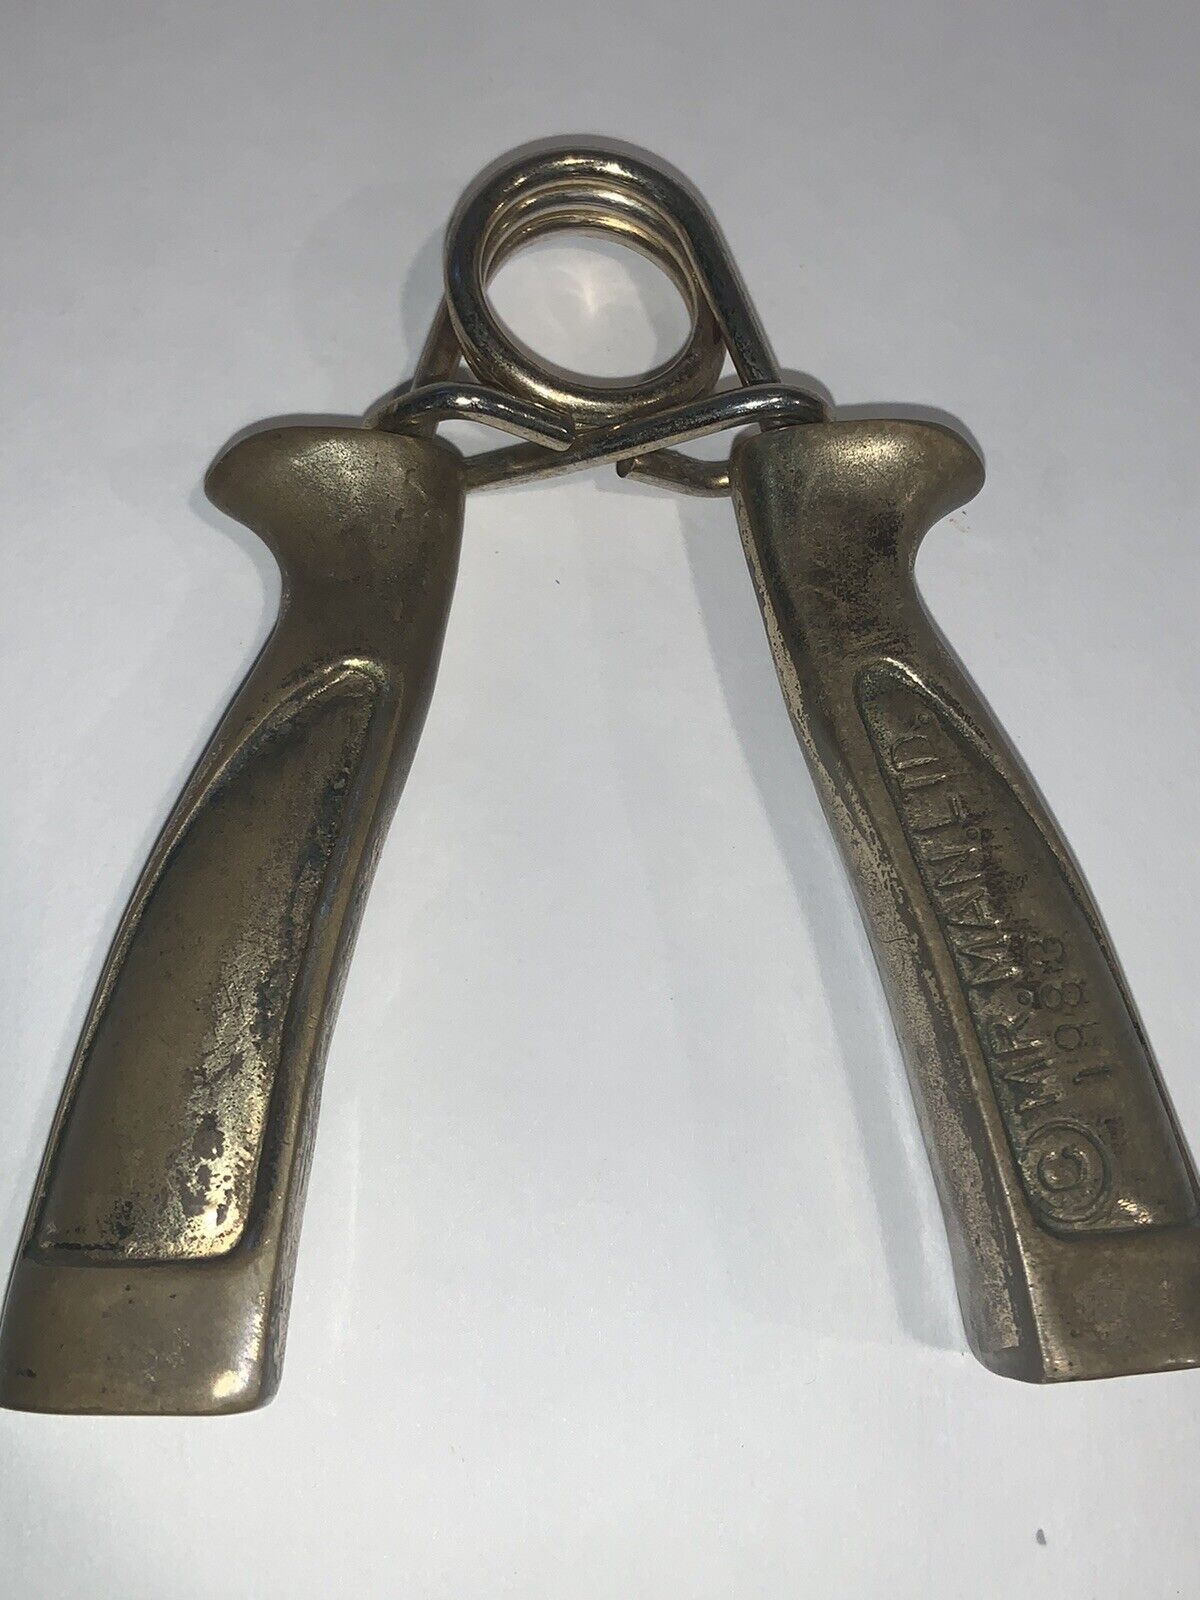 VINTAGE HAND GRIP EXERCISE SQUEEZER MR MAN 1983 SOLID HEAVY BRASS